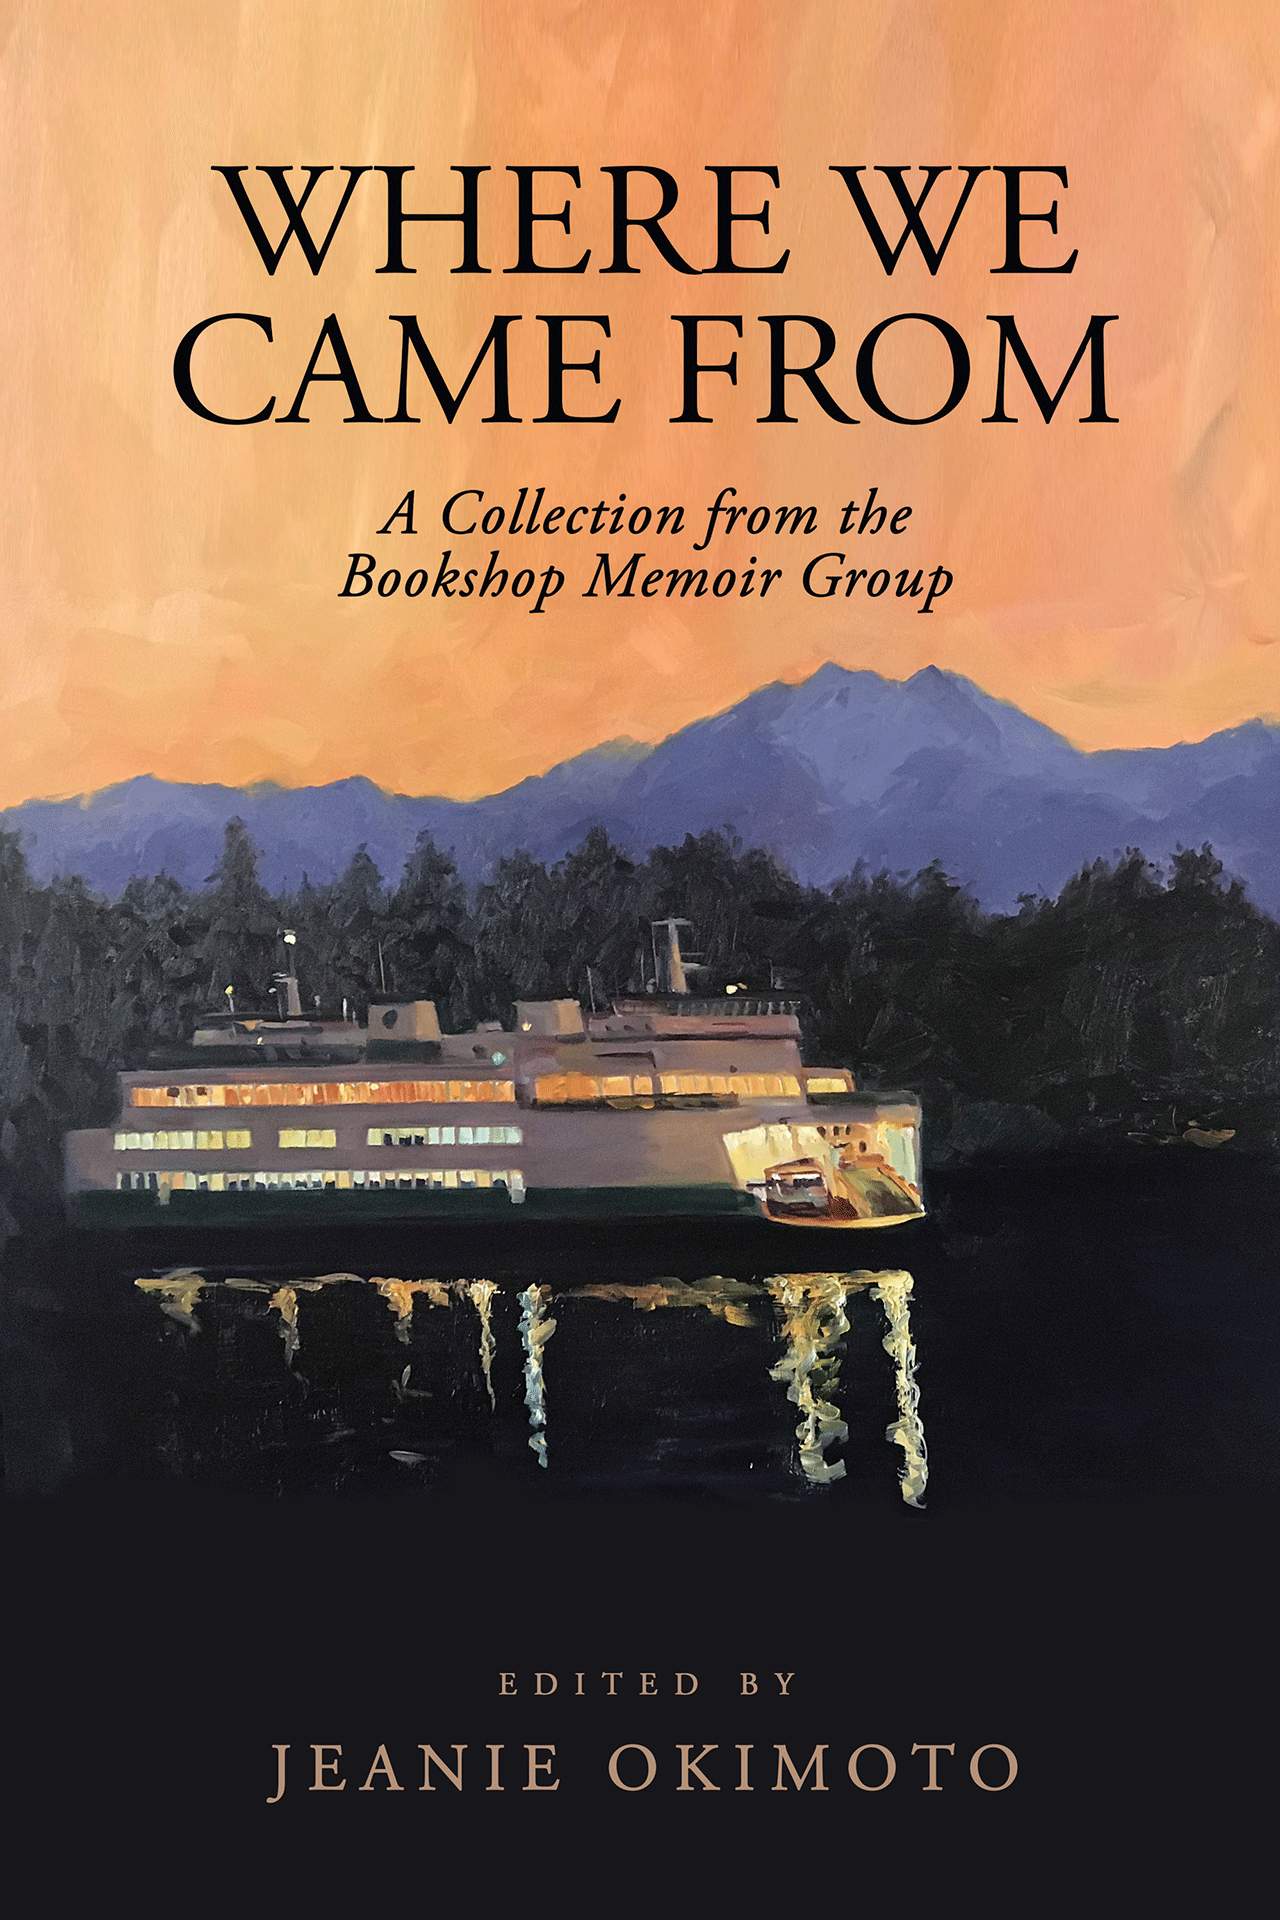 (Courtesy Photo)
Pam Ingalls donated the image of her painting featured on the cover of “Where We Came From.” Her husband, Michael Monteleone, is a member of the memoir writing group.